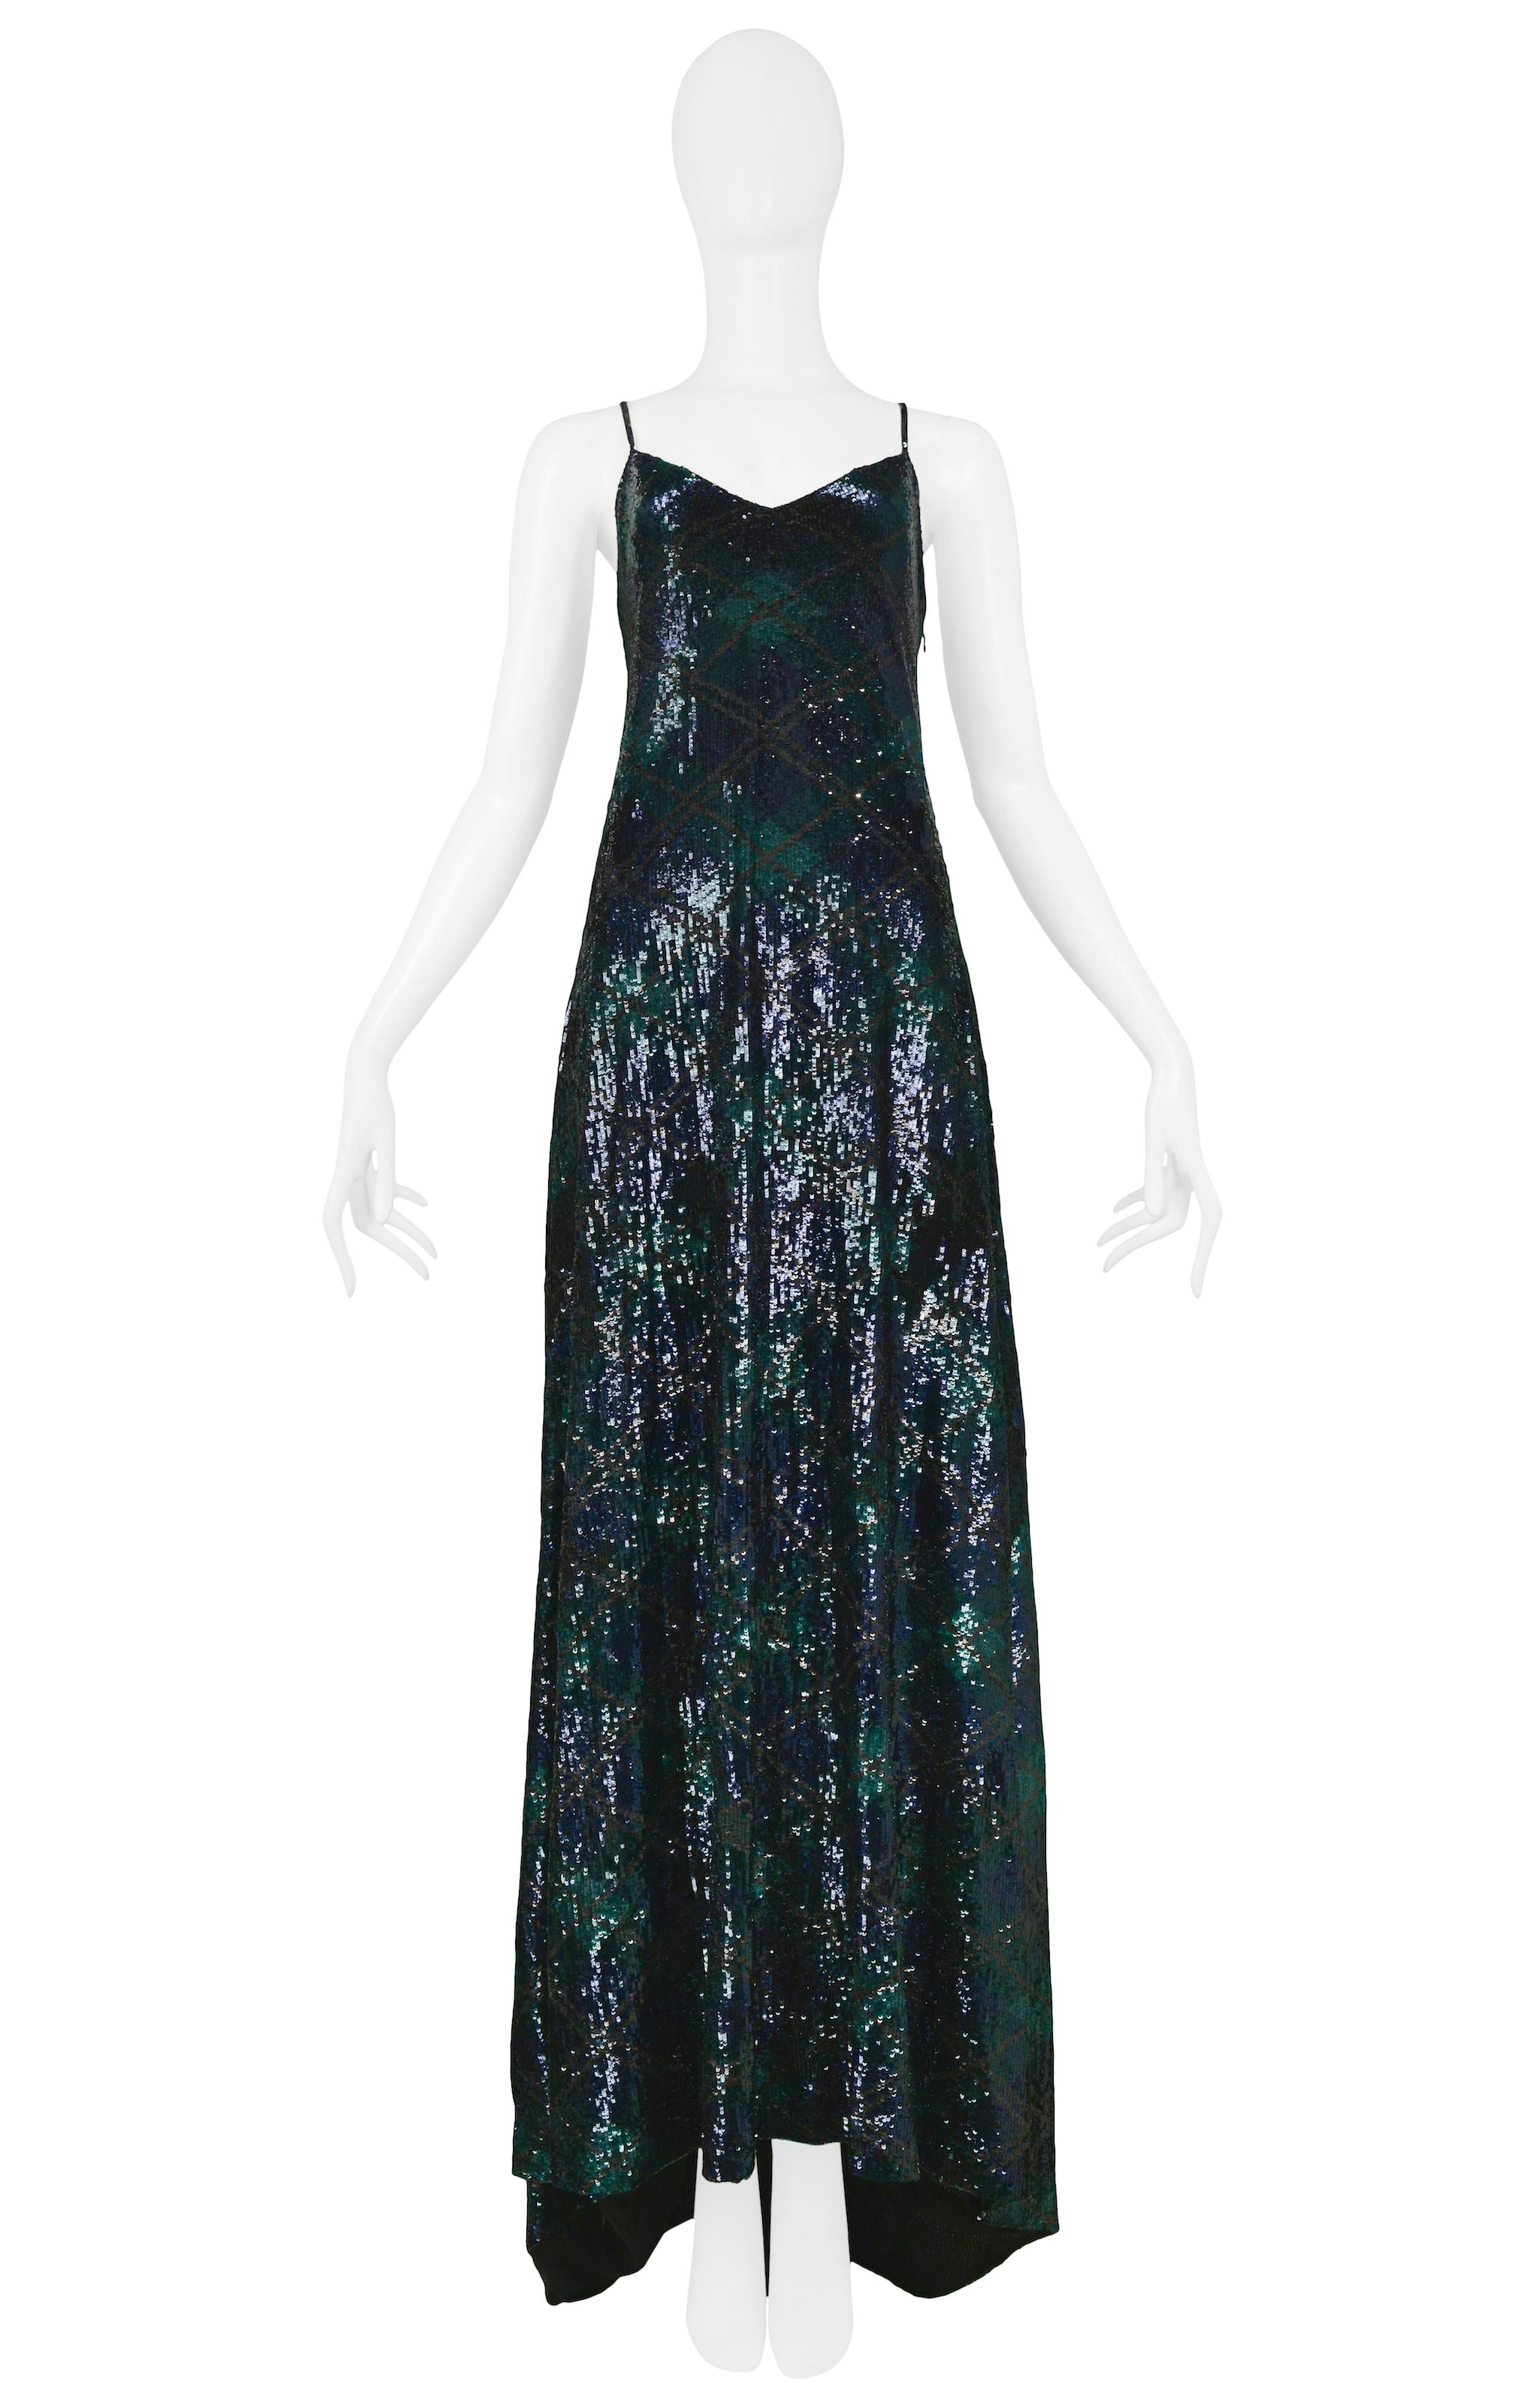 Vintage Ralph Lauren navy blue and forest green silk sequined argyle print evening gown with spaghetti straps that cross at center back and a slight train.

Excellent Vintage Condition.

Size 8